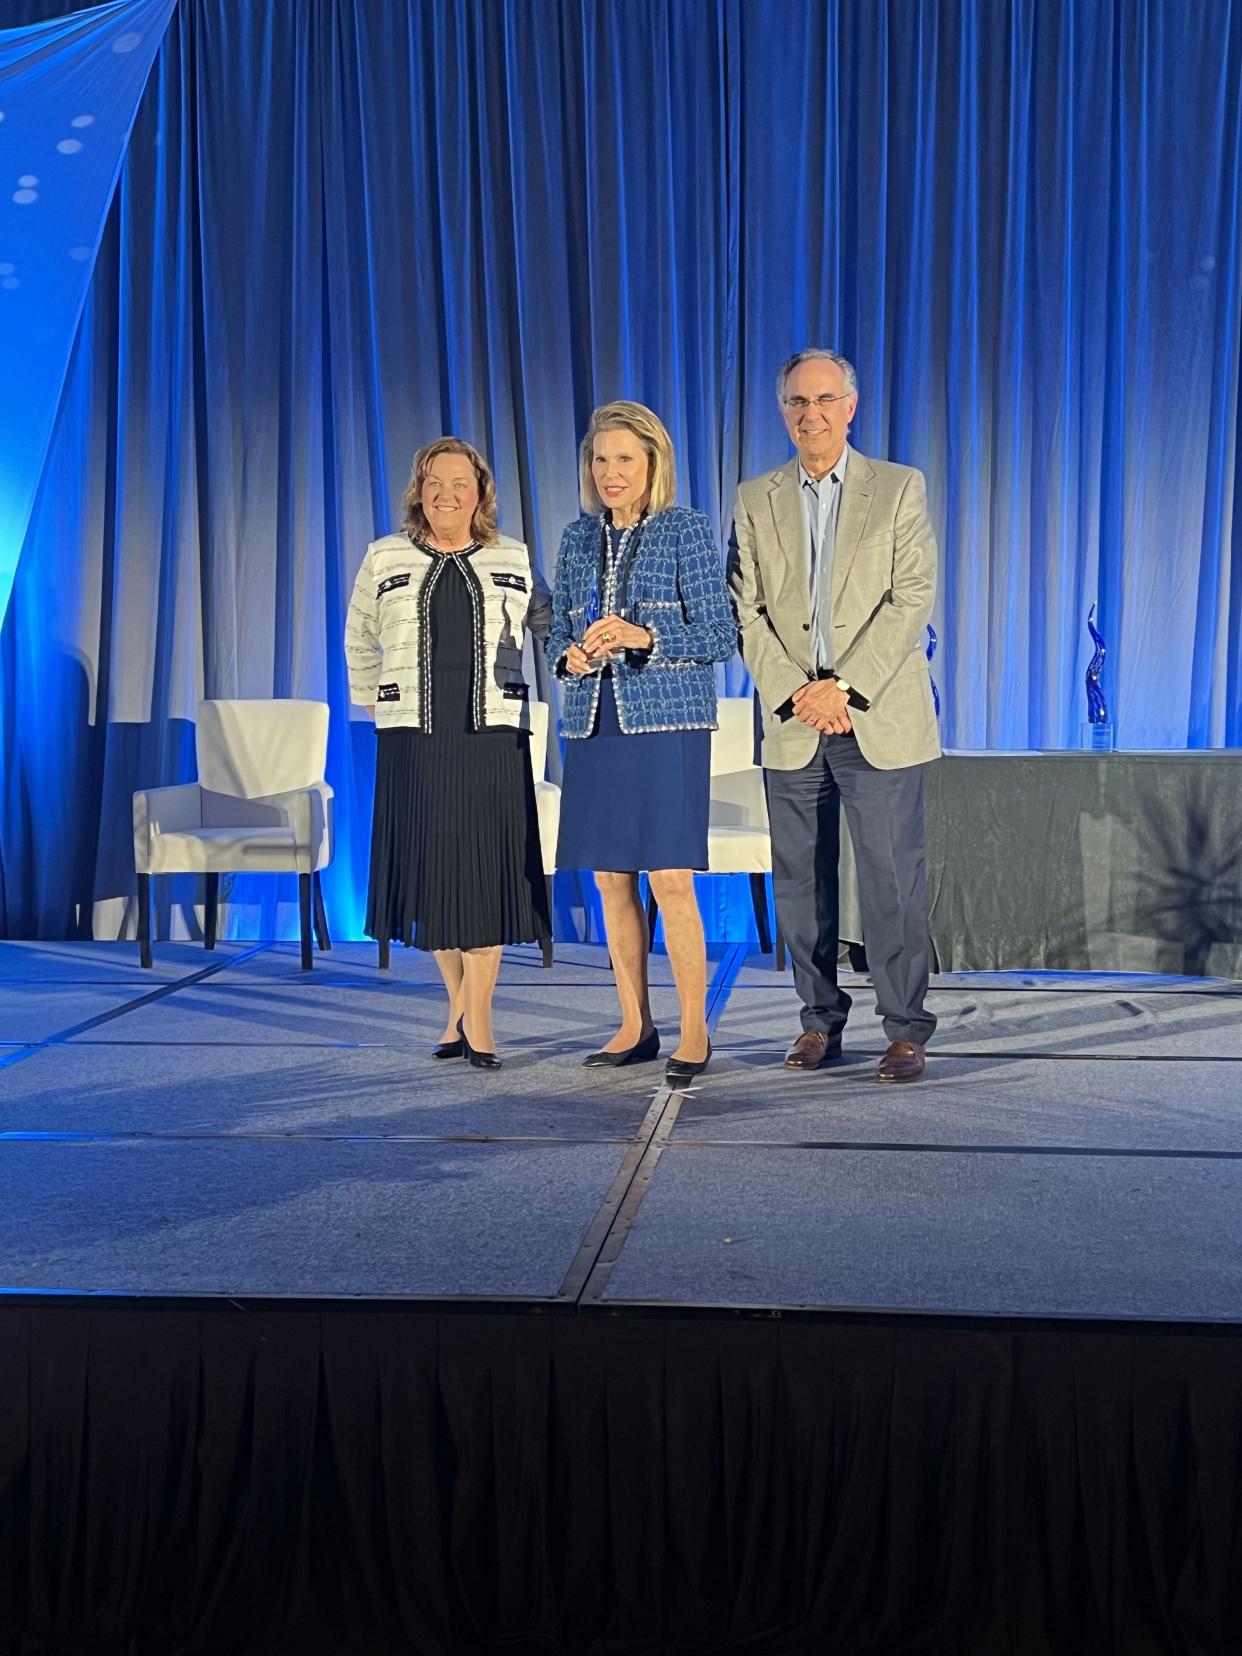 Florida Blue Foundation Executive Director Susan Towler, from left, Promise Fund of Florida co-founder Nancy G. Brinker and Charles Joseph, executive vice president, corporate affairs and chief legal officer at Florida Blue/GuideWell at the Florida Blue Sapphire Award Ceremony in Orlando.